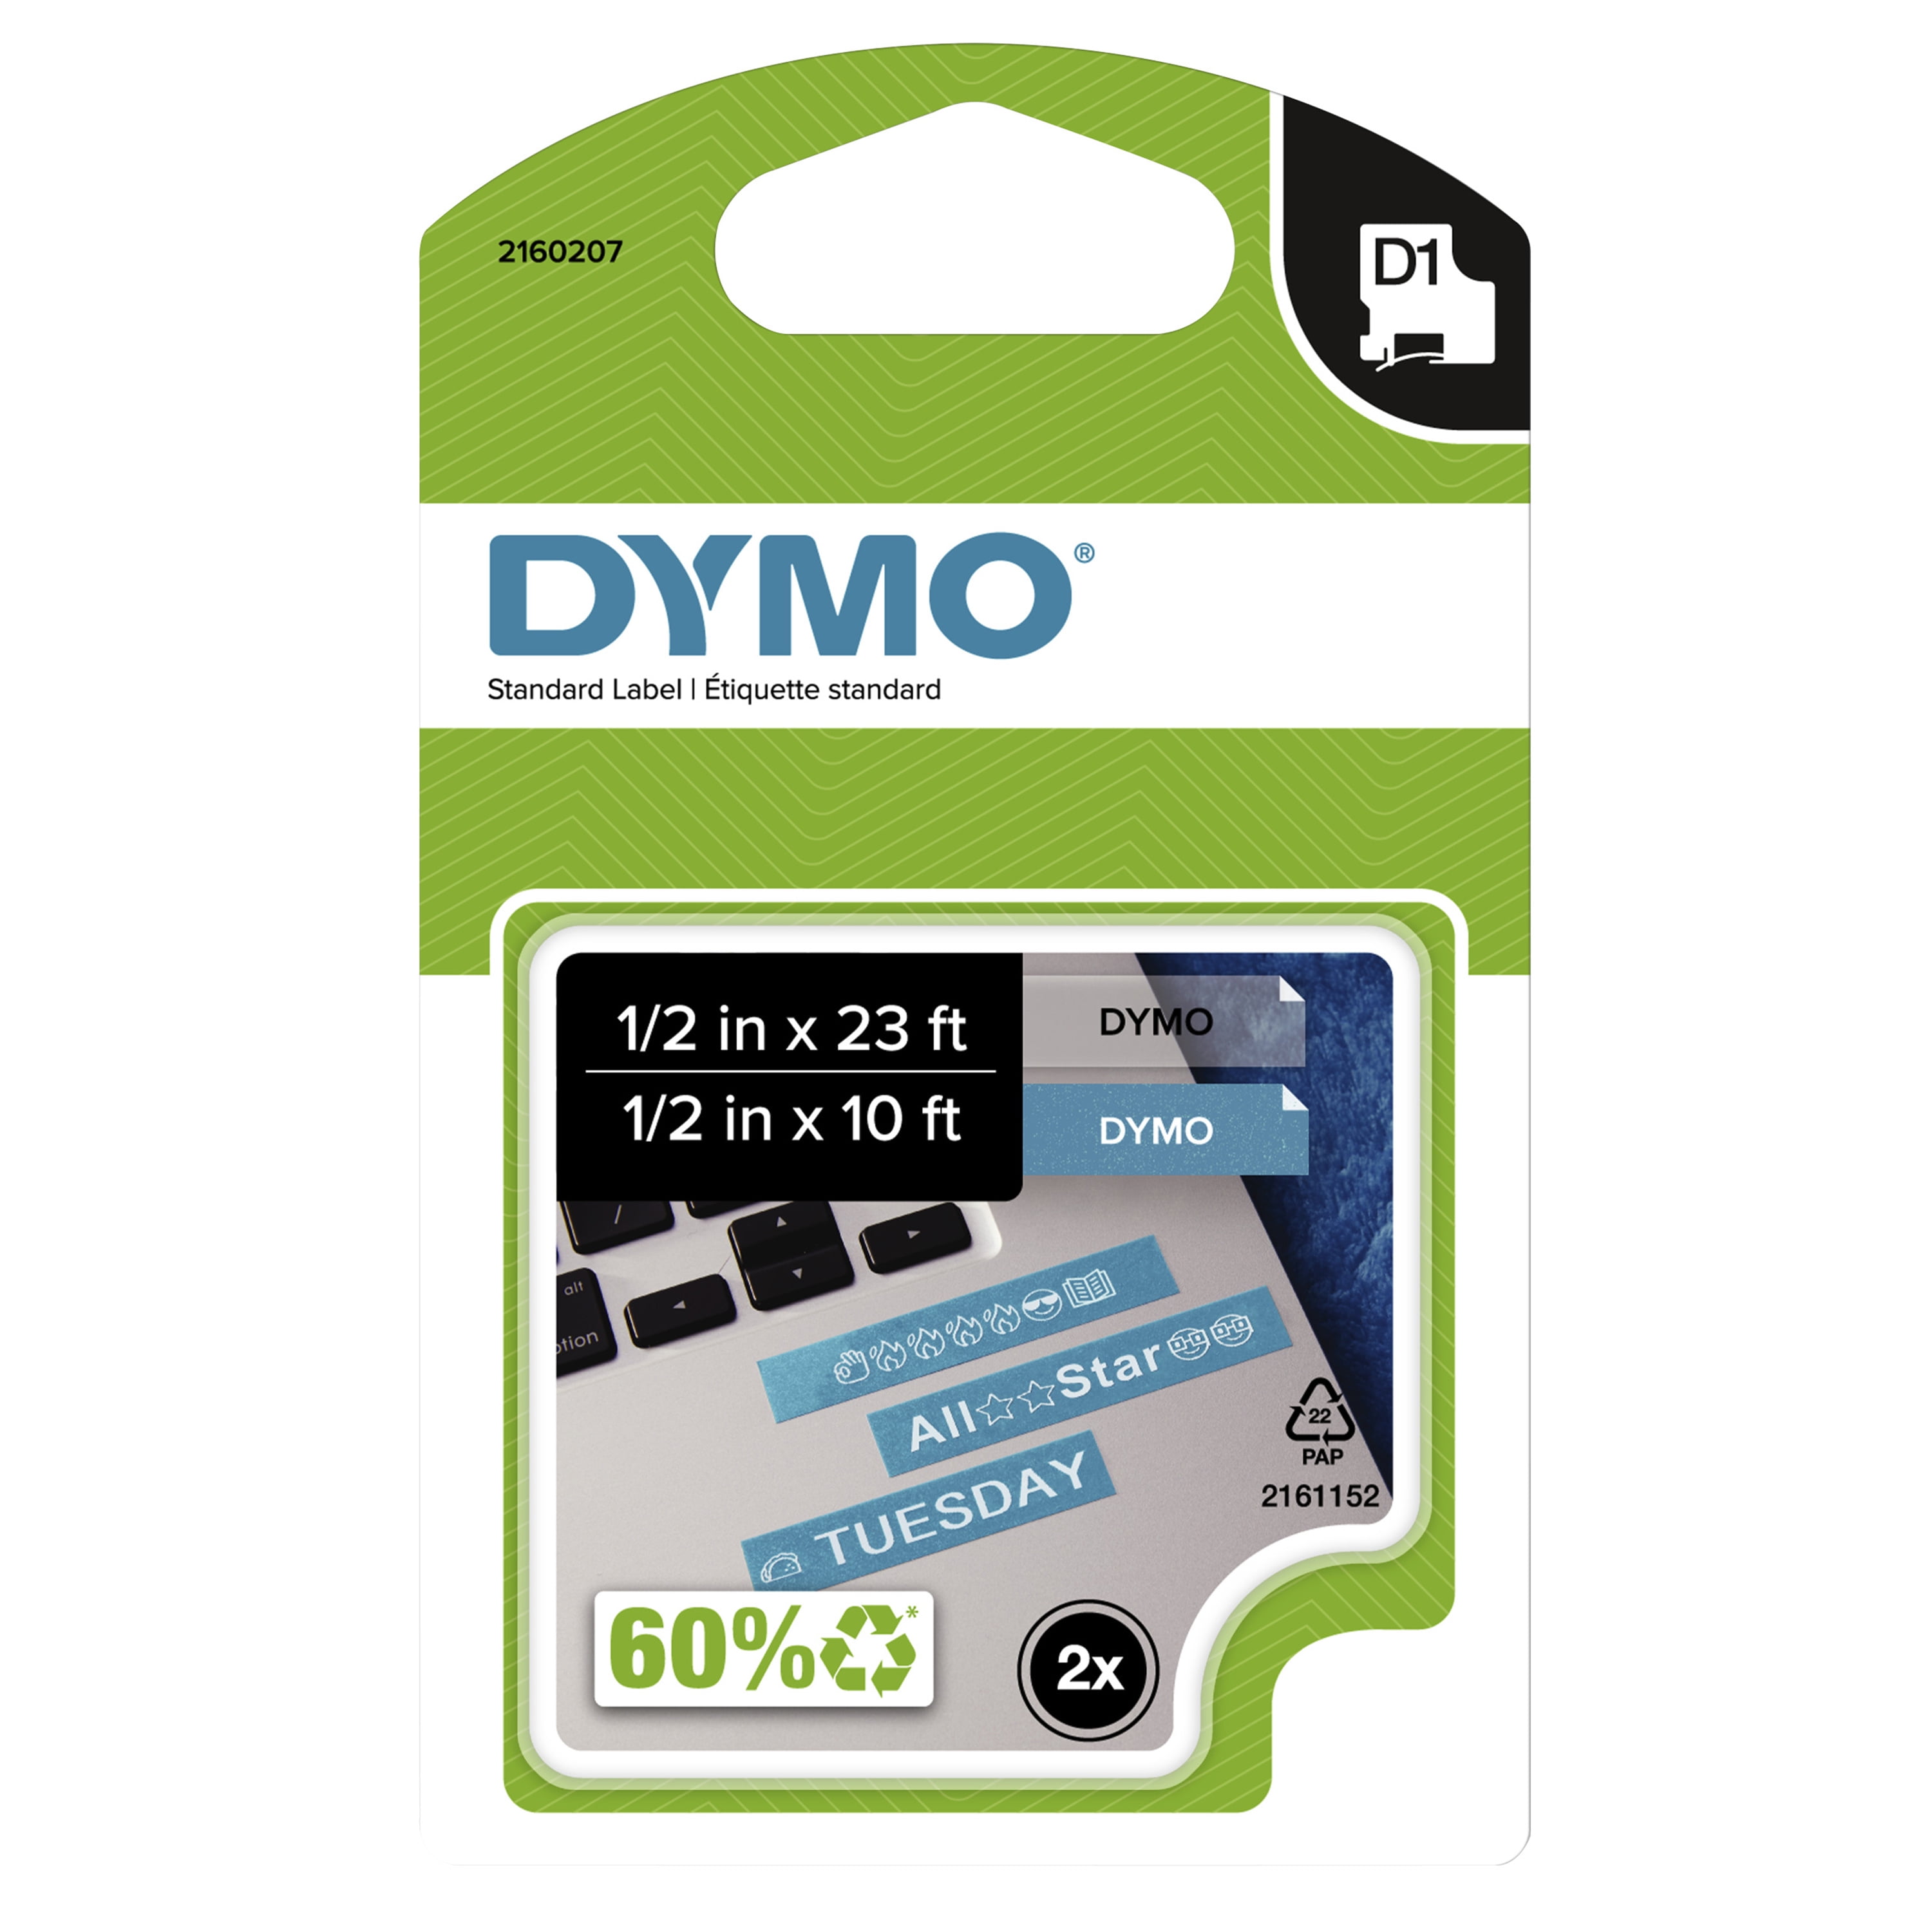 DYMO D1 Label Combo Pack, 1/2" x 10' D1 (White Print on Blue Glitter) and x 23' D1 Print on Clear) - Walmart.com